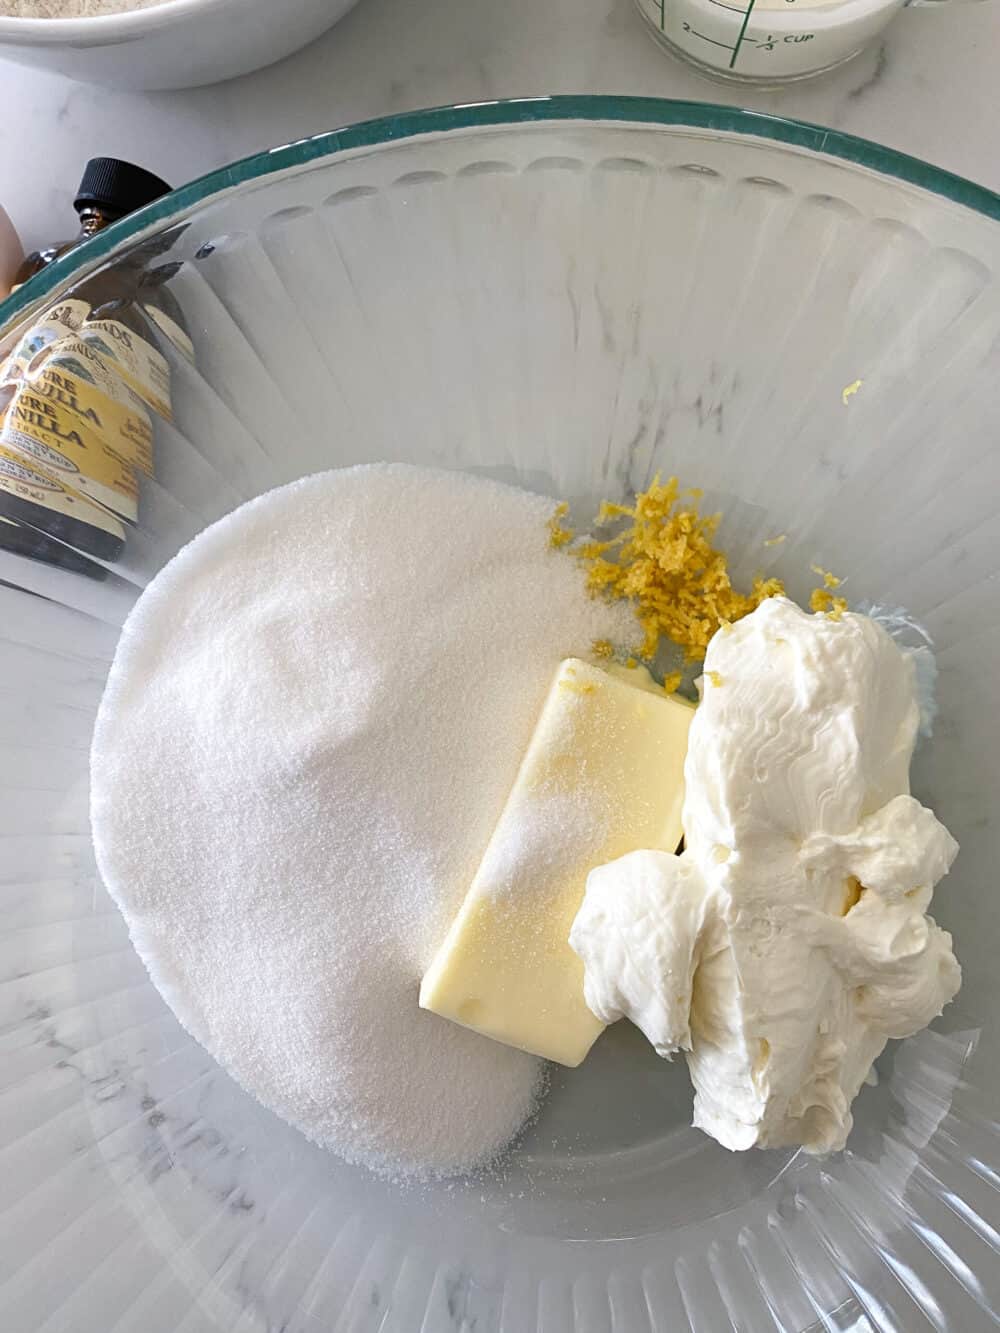 Butter, Sugar, Cream Cheese and Lemon Zest in a Large Glass Bowl